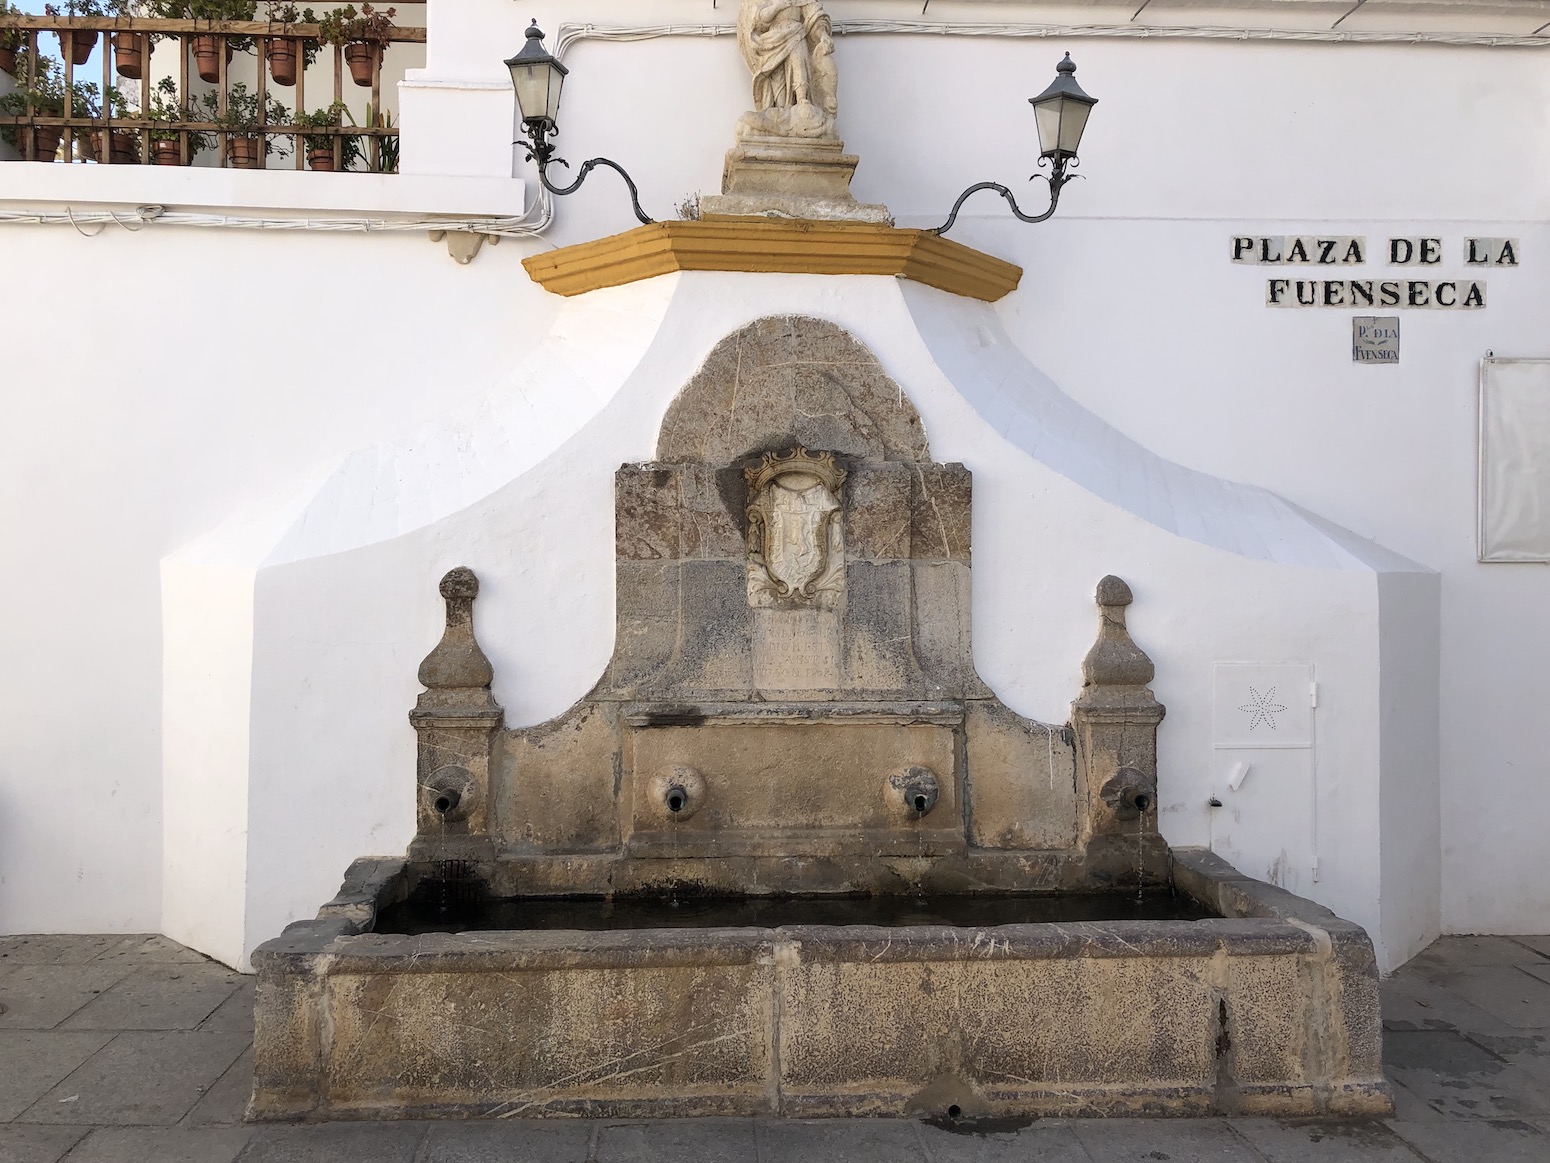 Fountains are dotted throughout Cordoba's streets